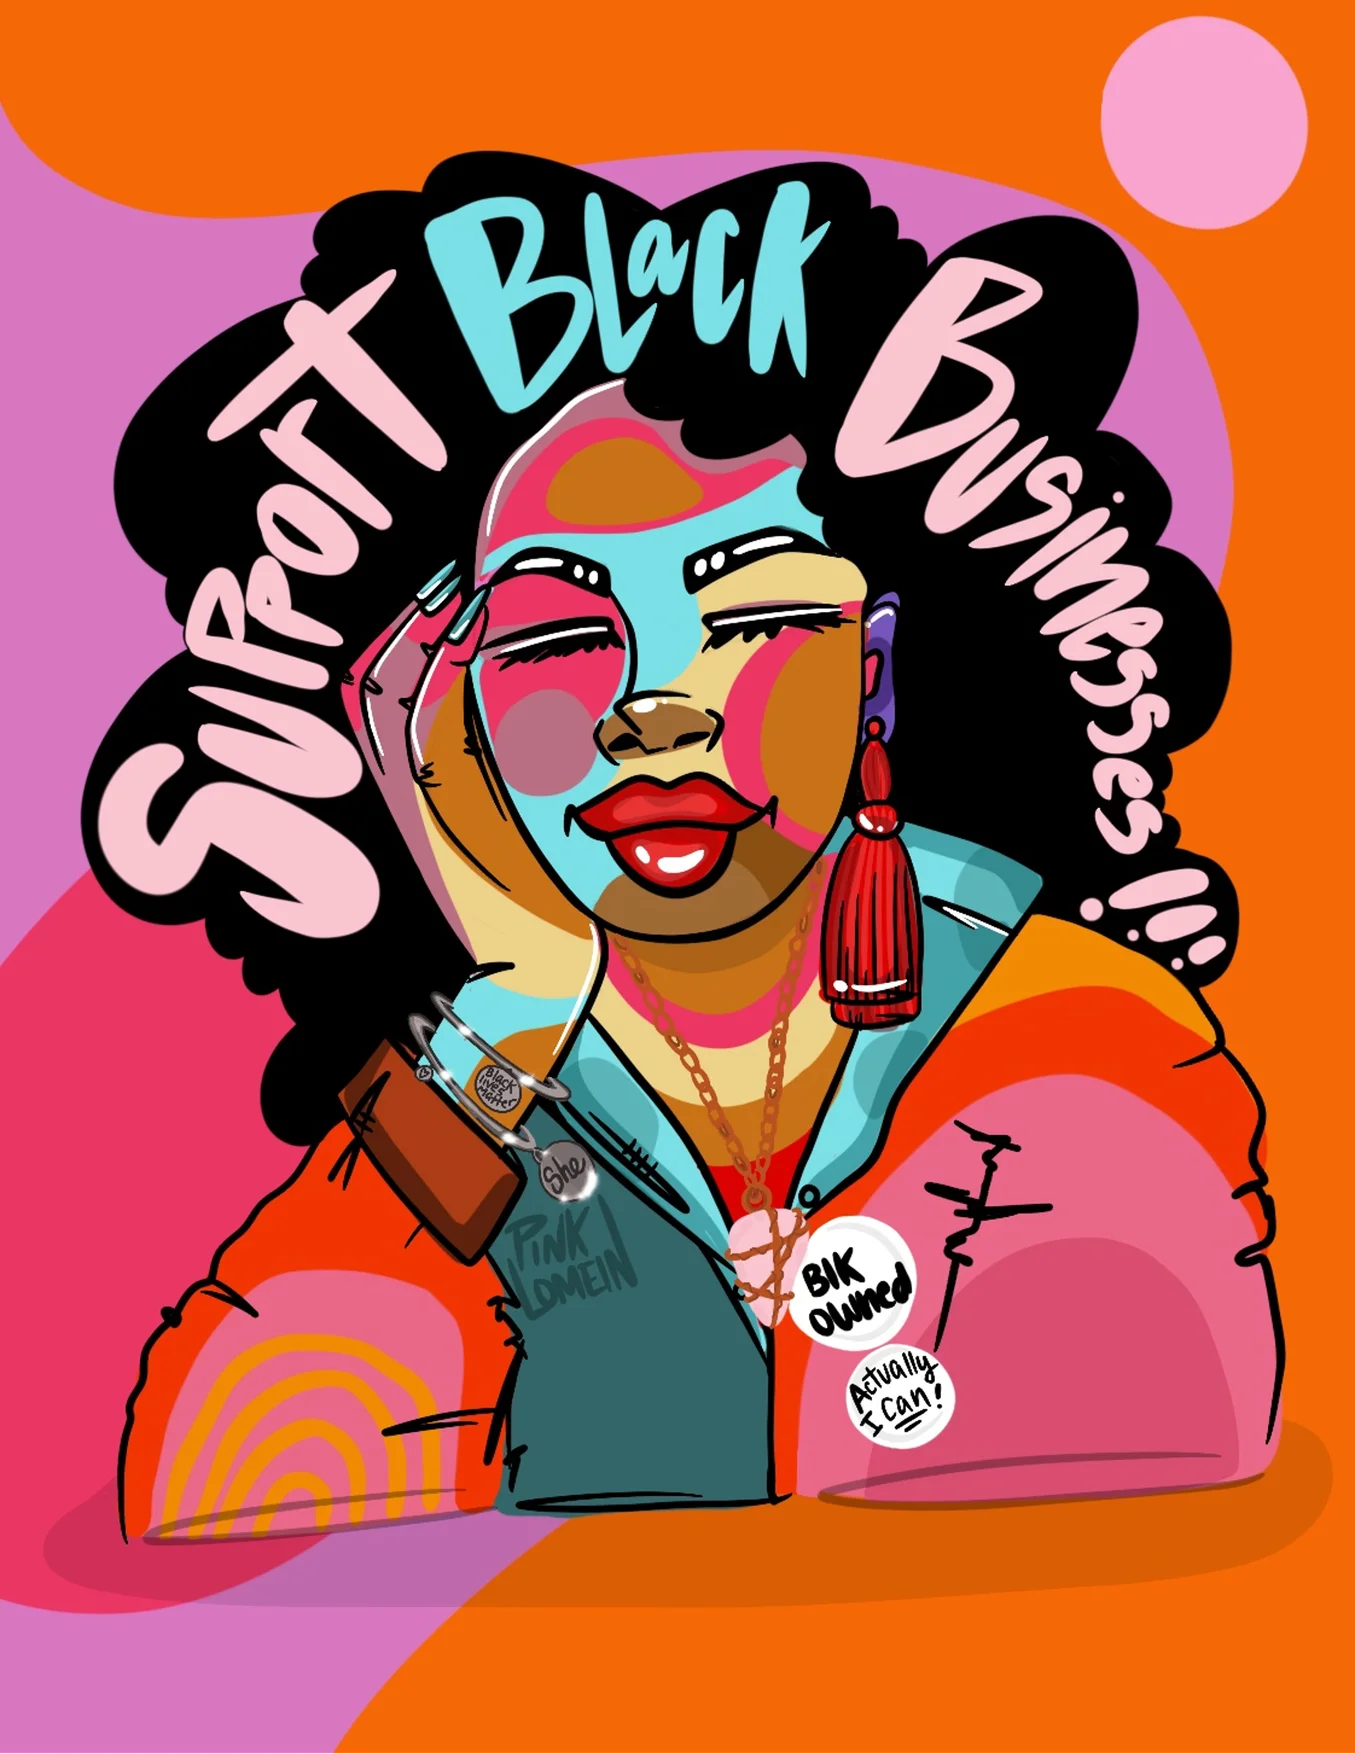 An illustration of a Black woman with the phrase "Support Black Businesses" written on her hair.